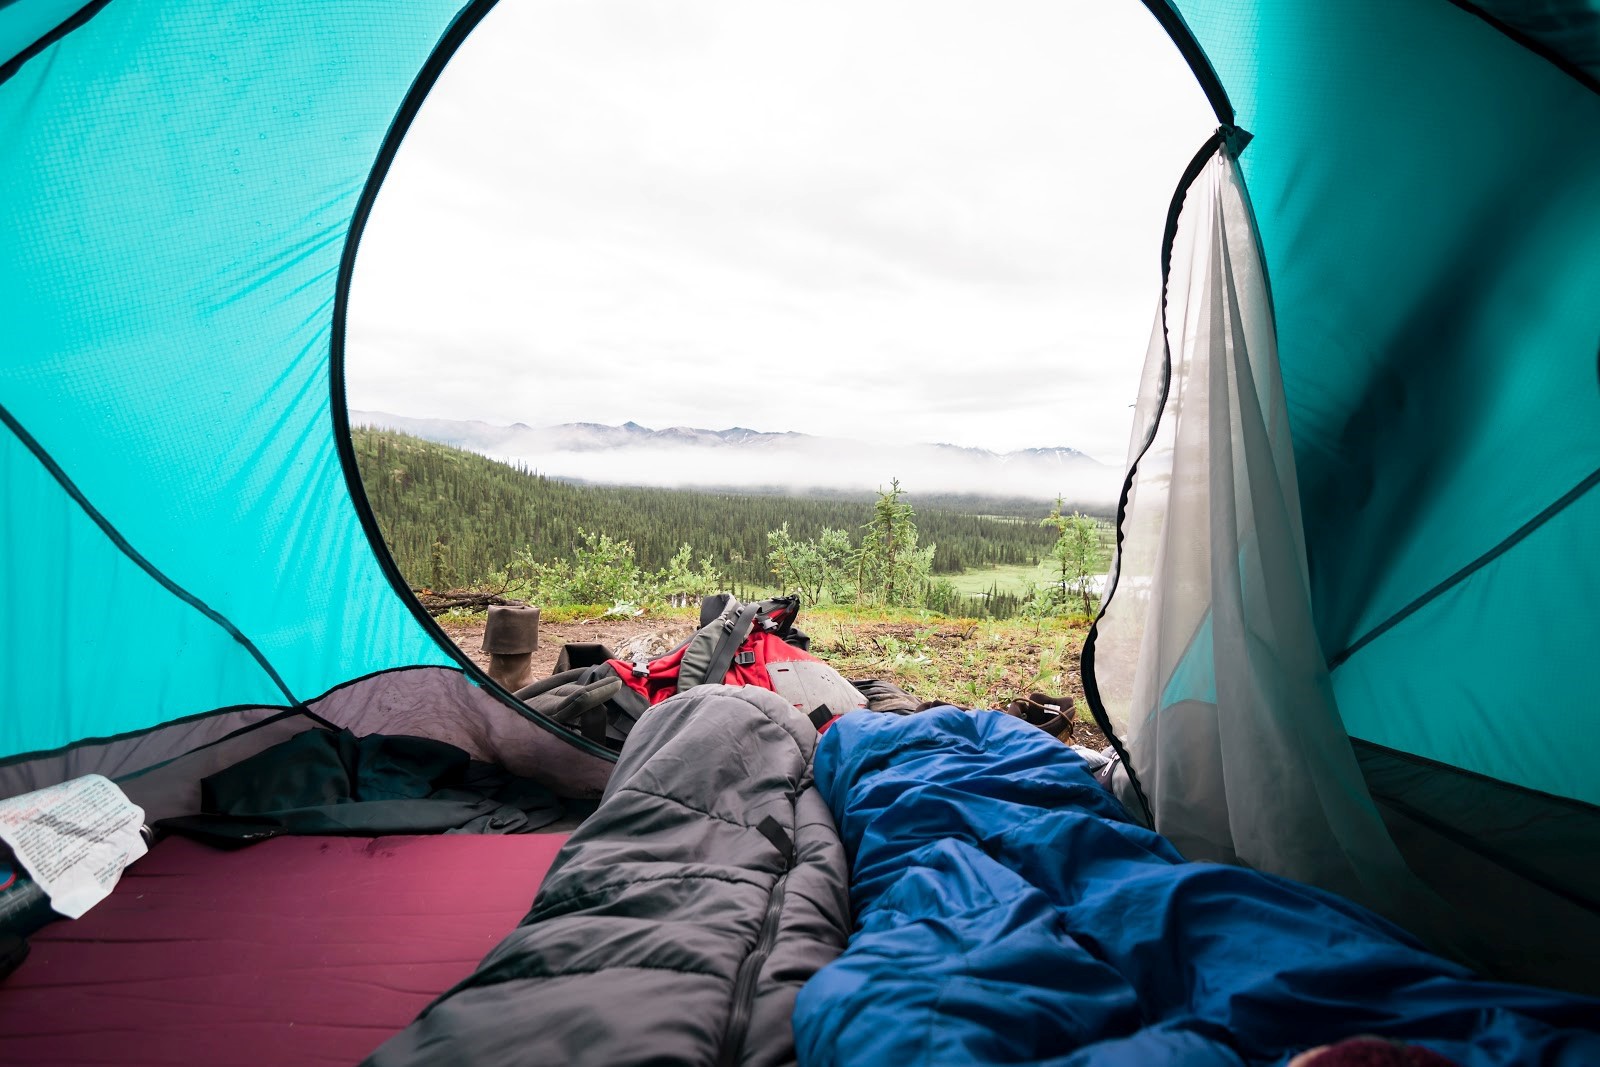 The Best Budget Sleeping Bag Choices On The Market [Review And Buying Guide] - Outdoor With J